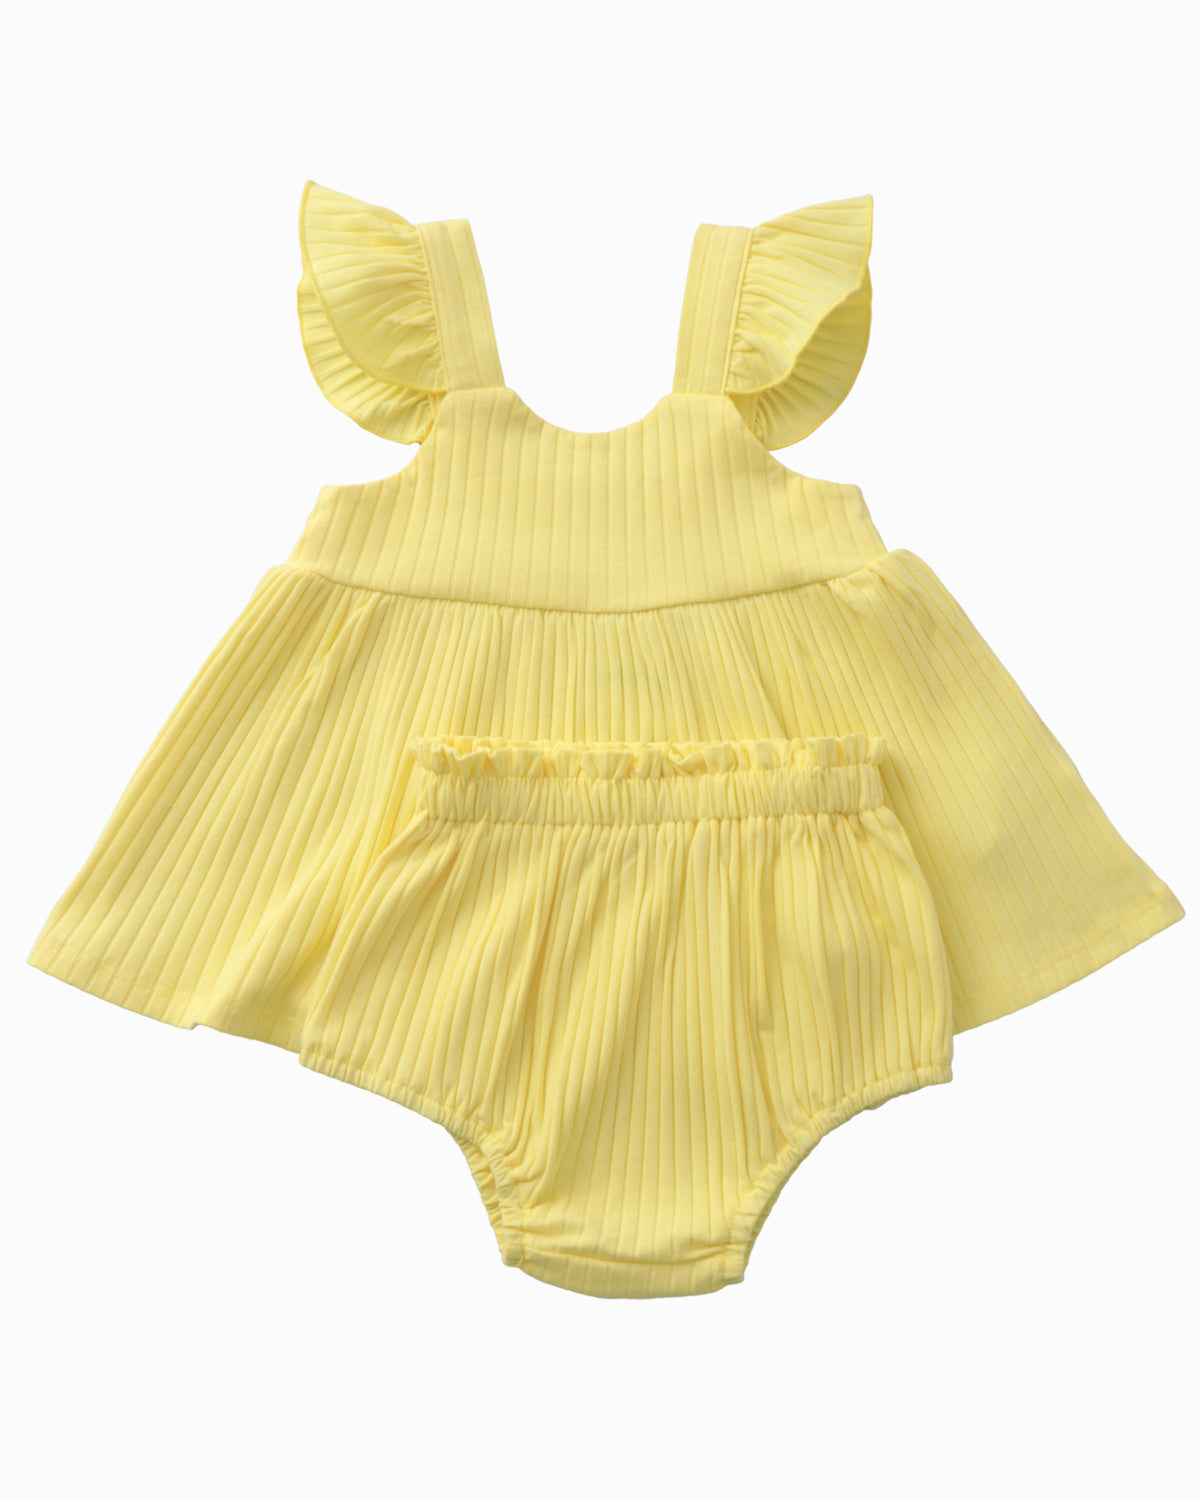 Ribbed Flutter Dress and Bloomers Set in Sunshine